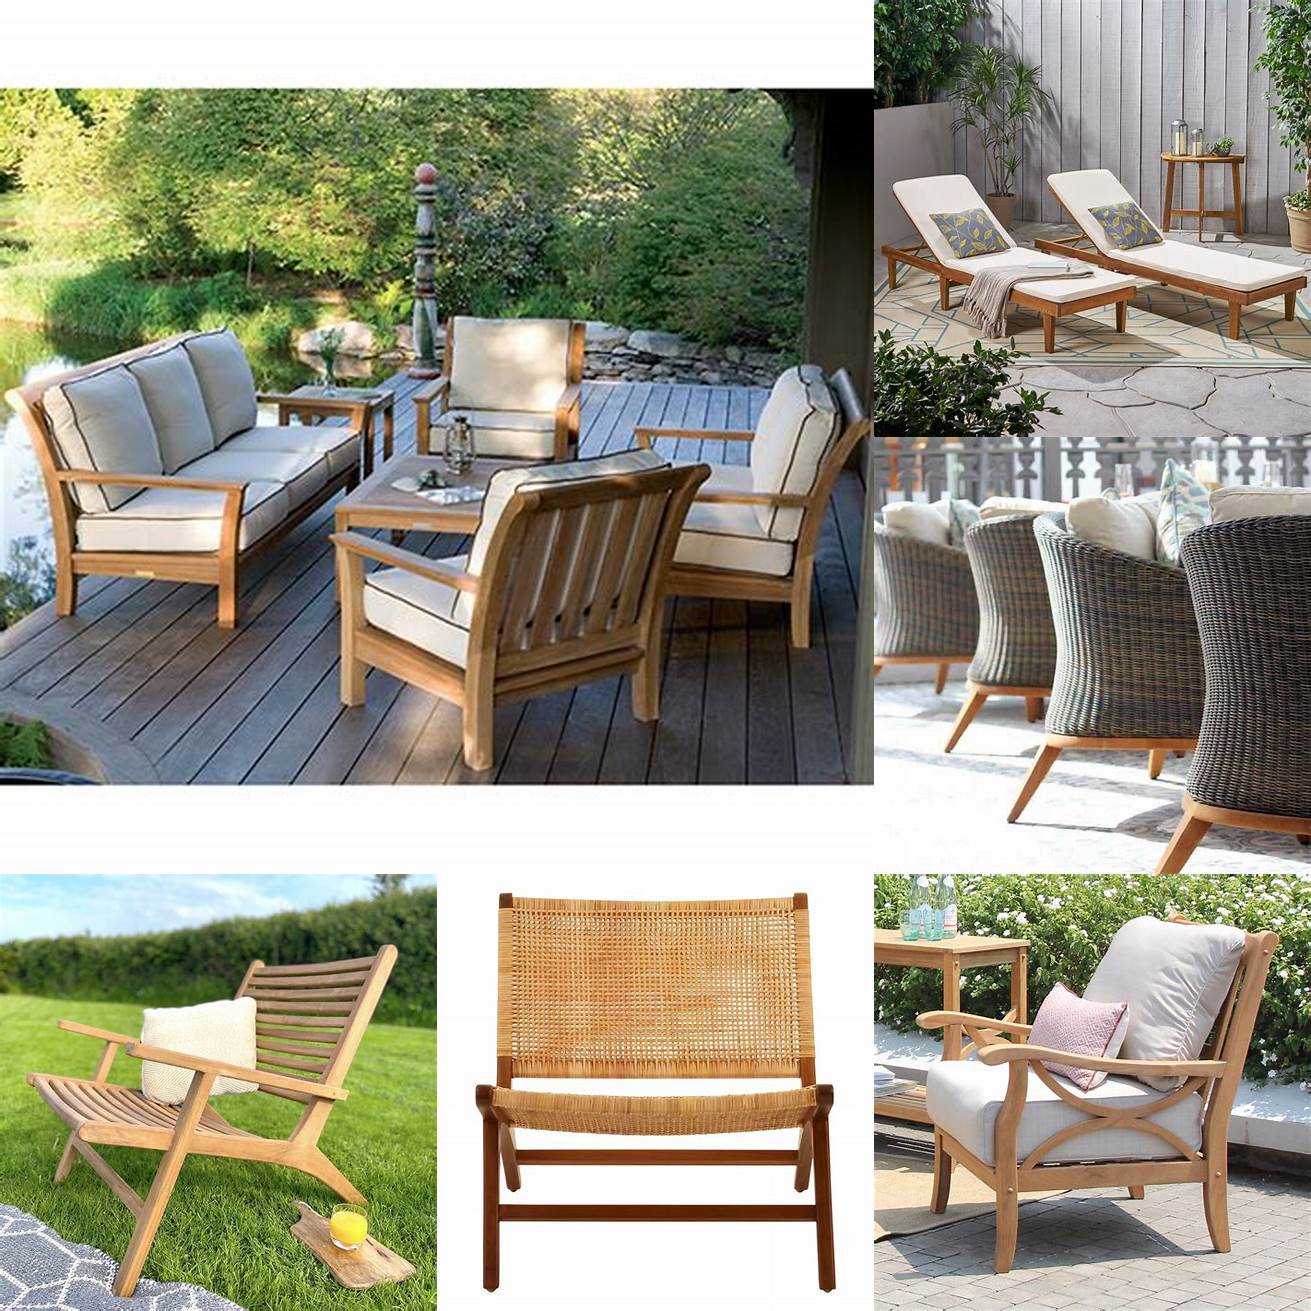 Wicker and Teak Outdoor Lounge Chair